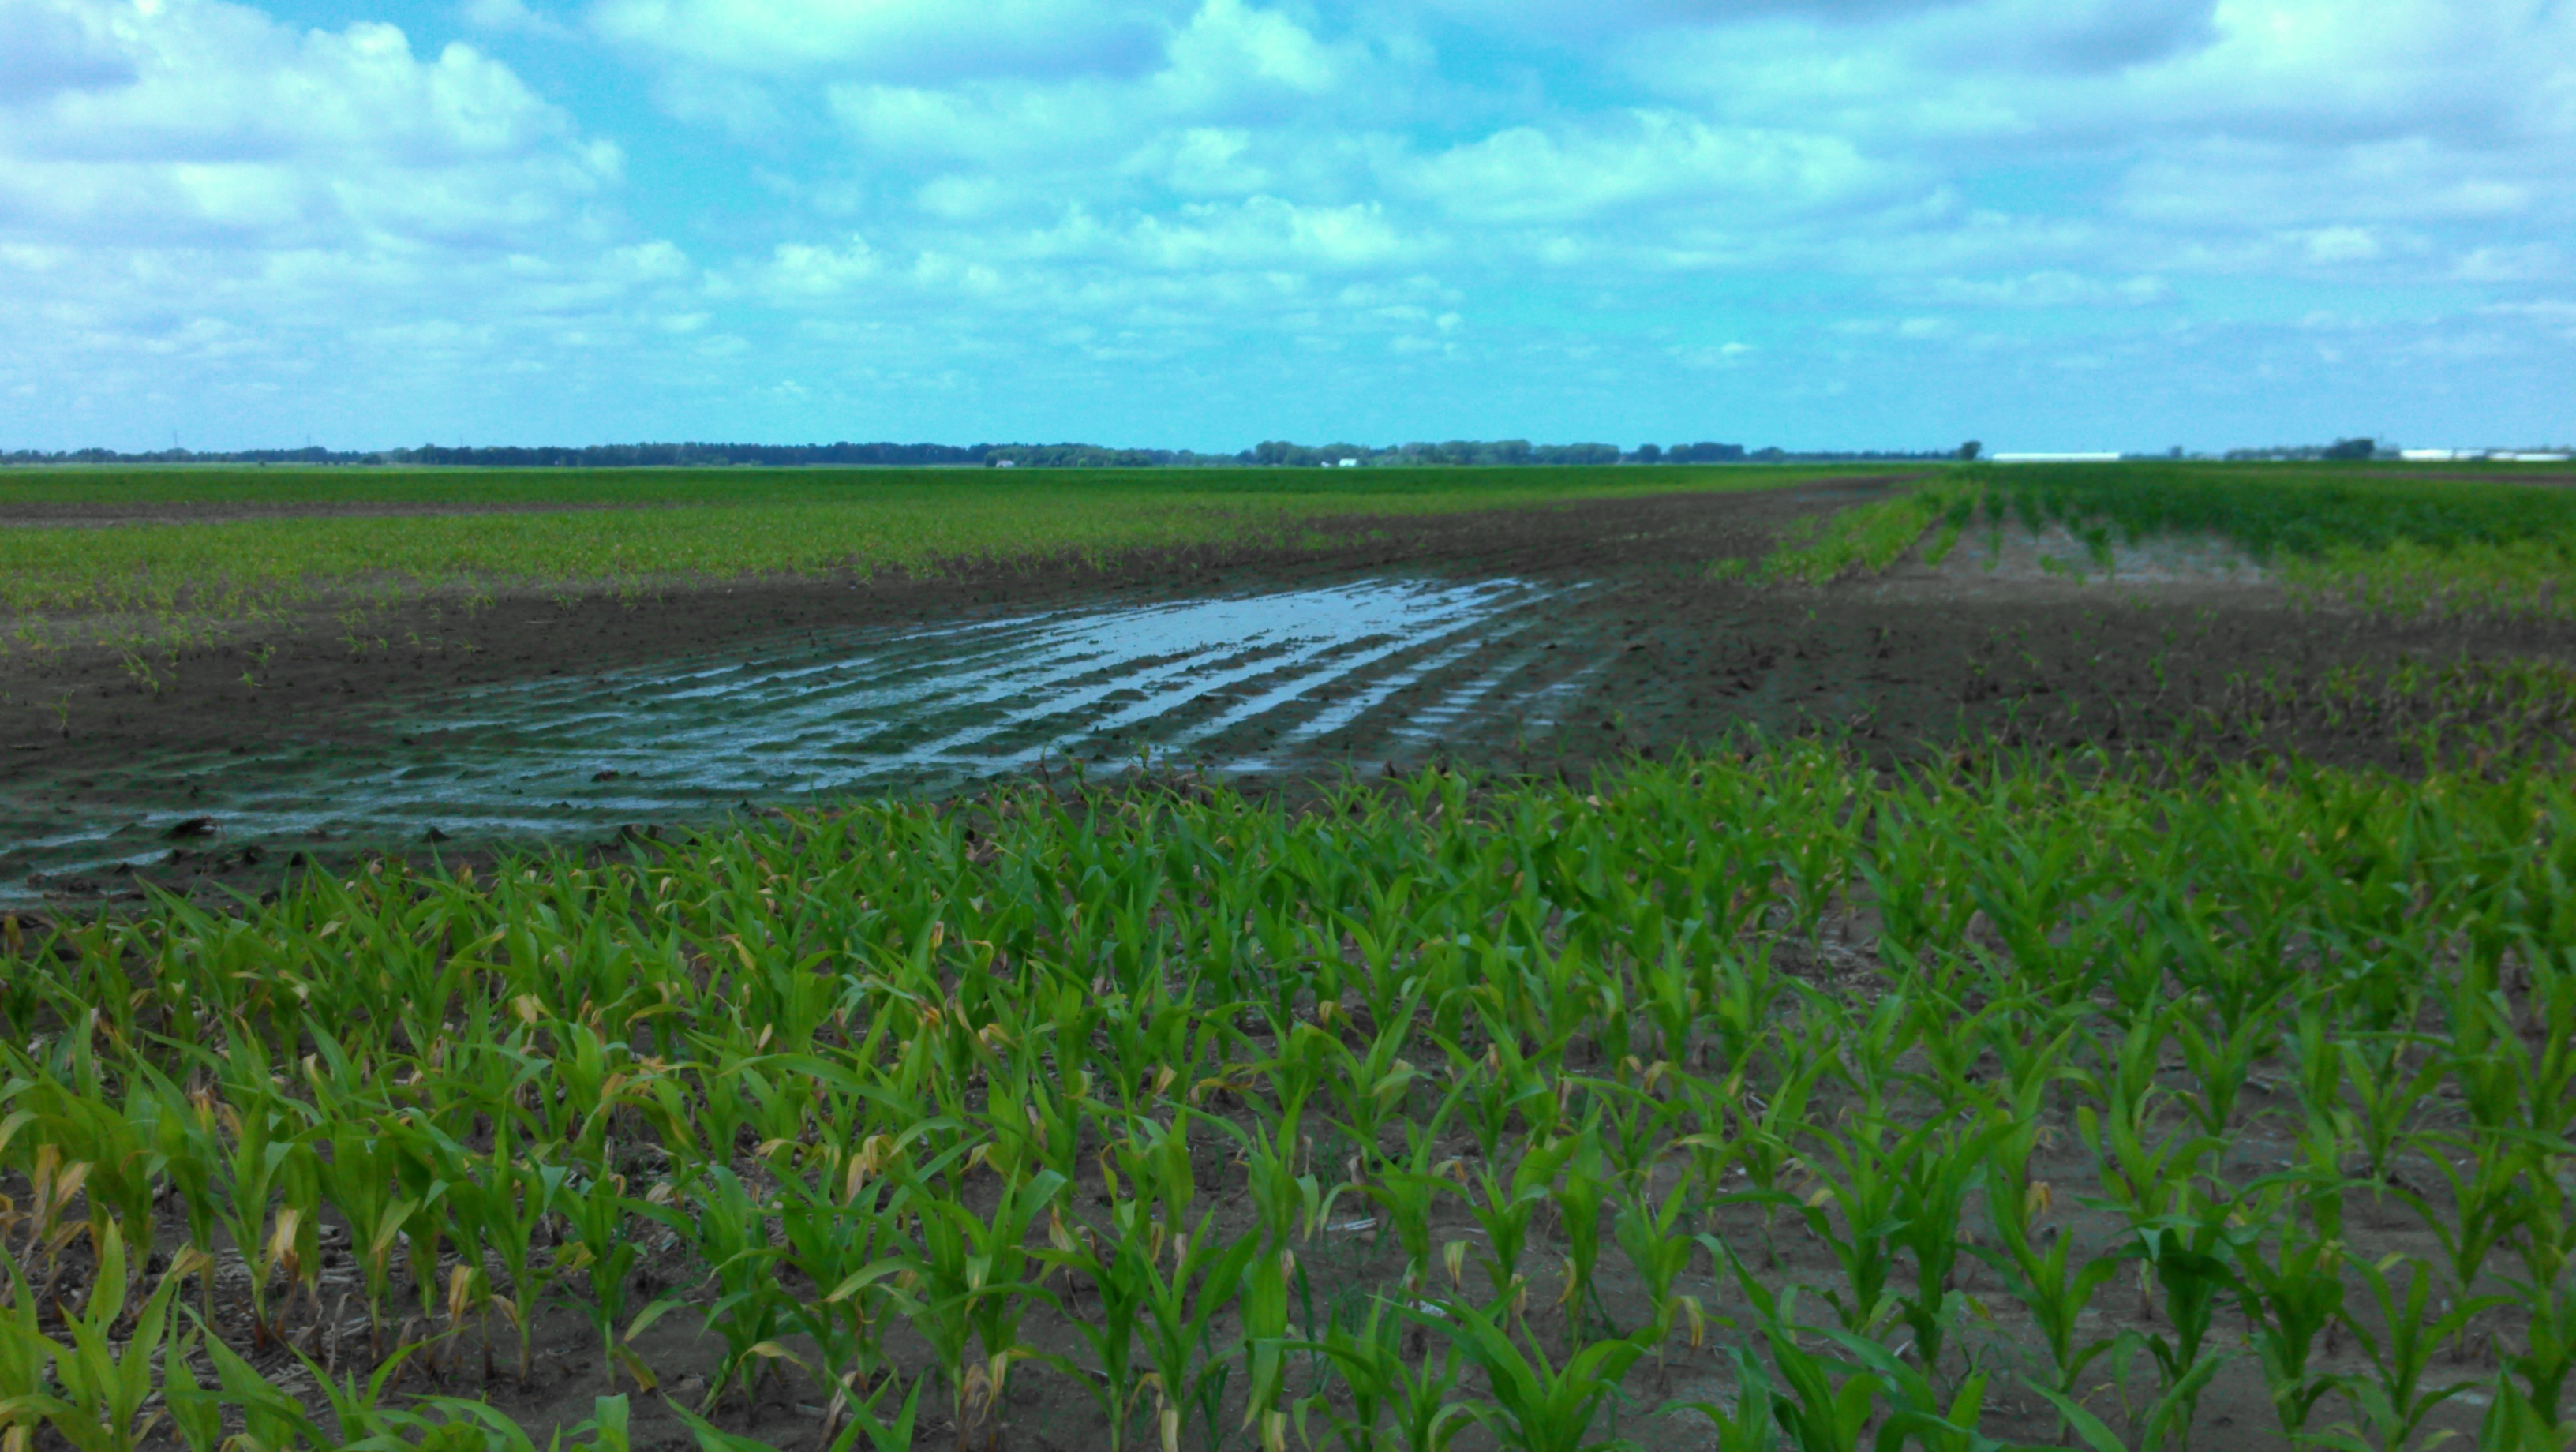 Poor drainage can cause problems for agricultural producers. (NDSU photo)